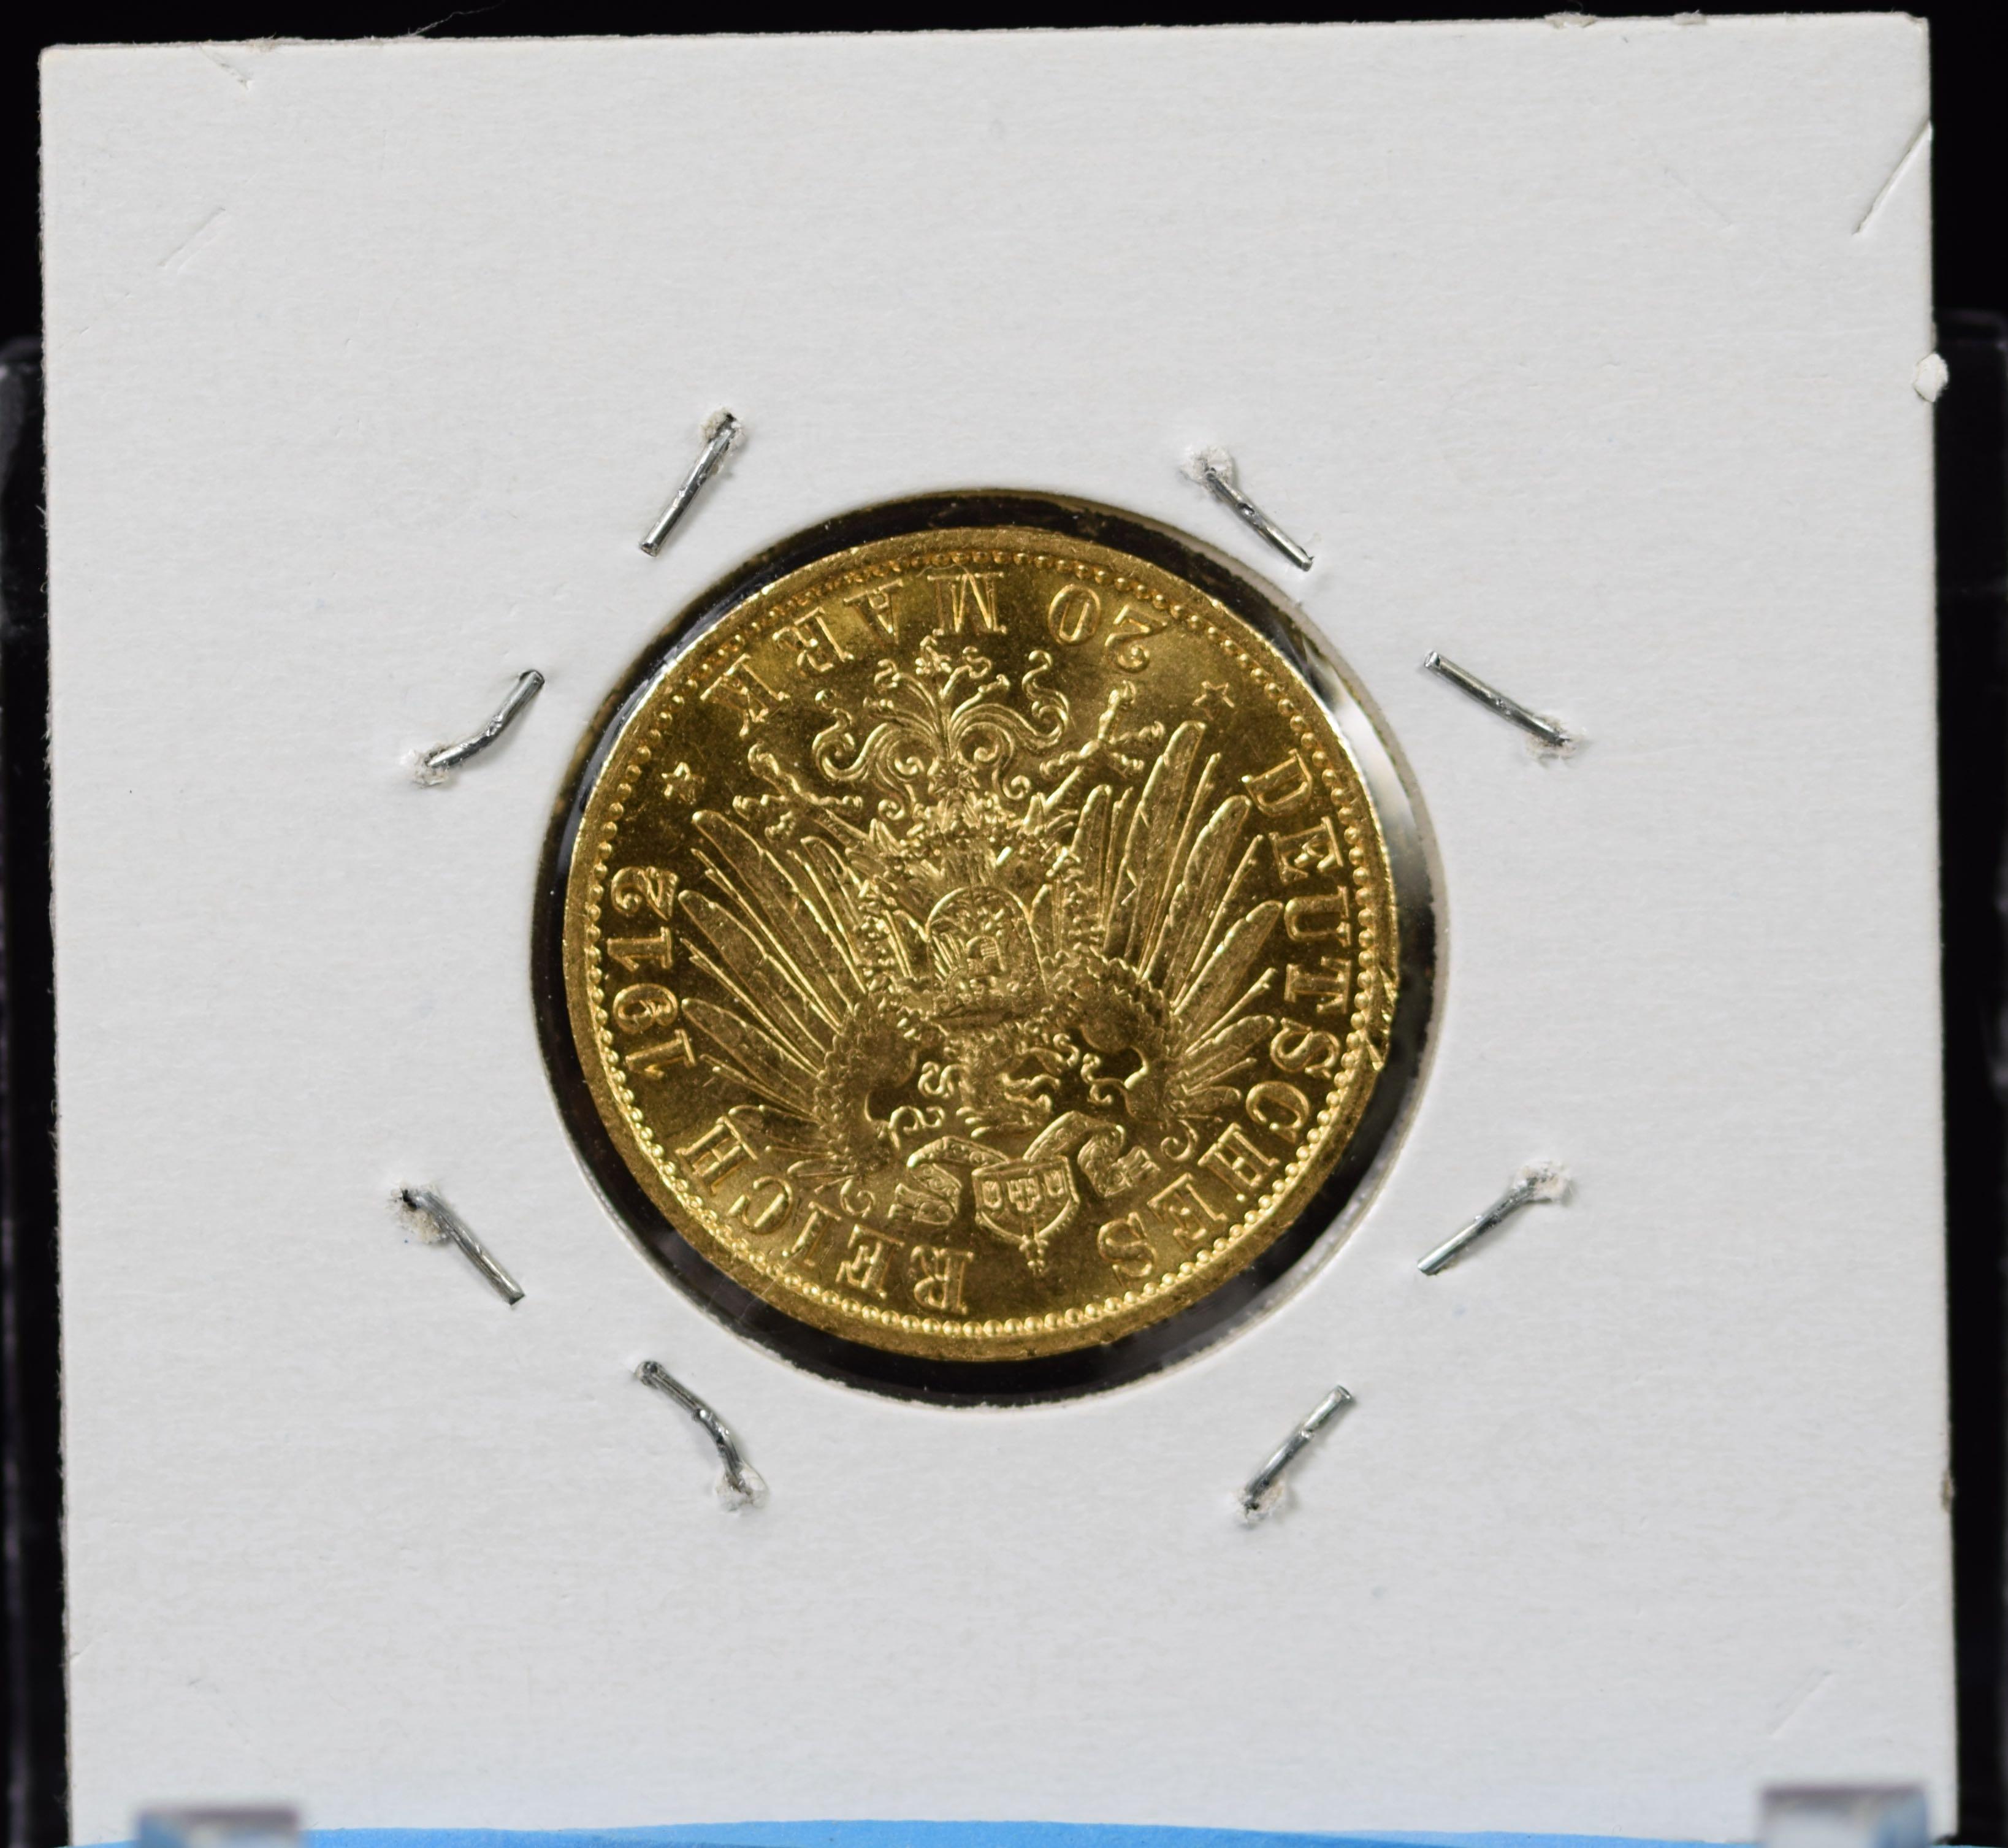 1912-A Gold Germany 20Mark UNC